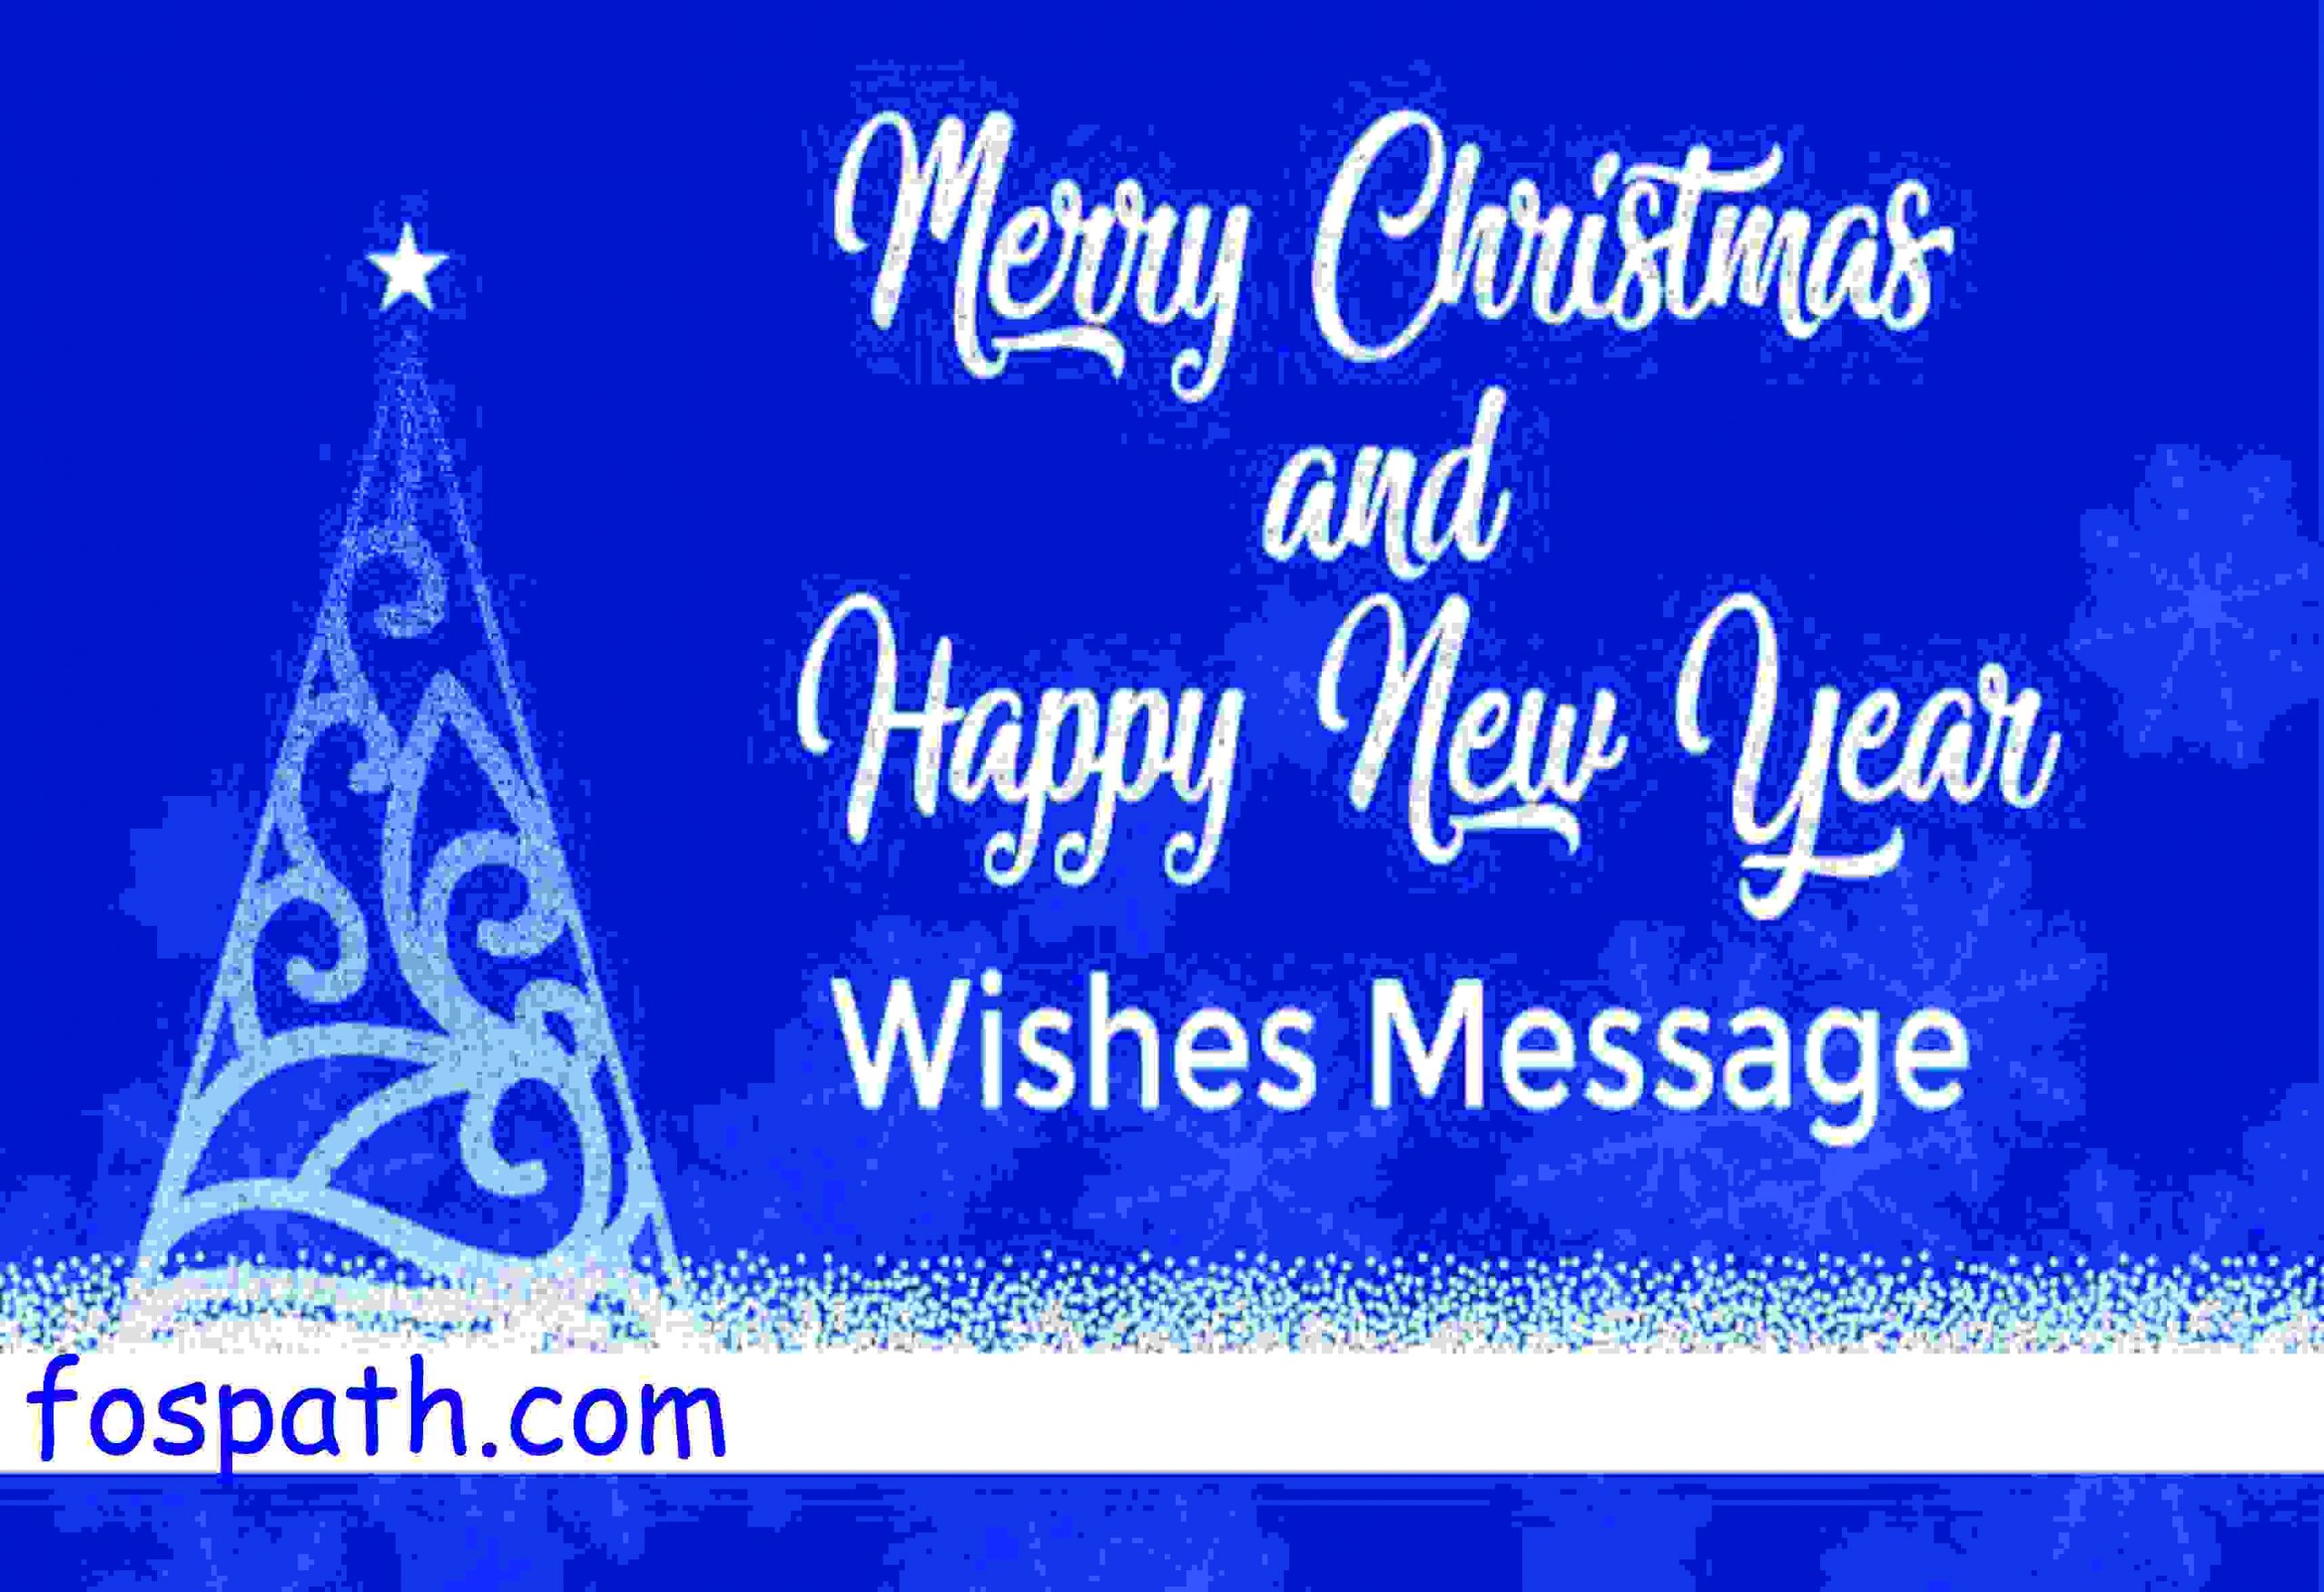 I Wish You a Merry Christmas and a Happy New Year